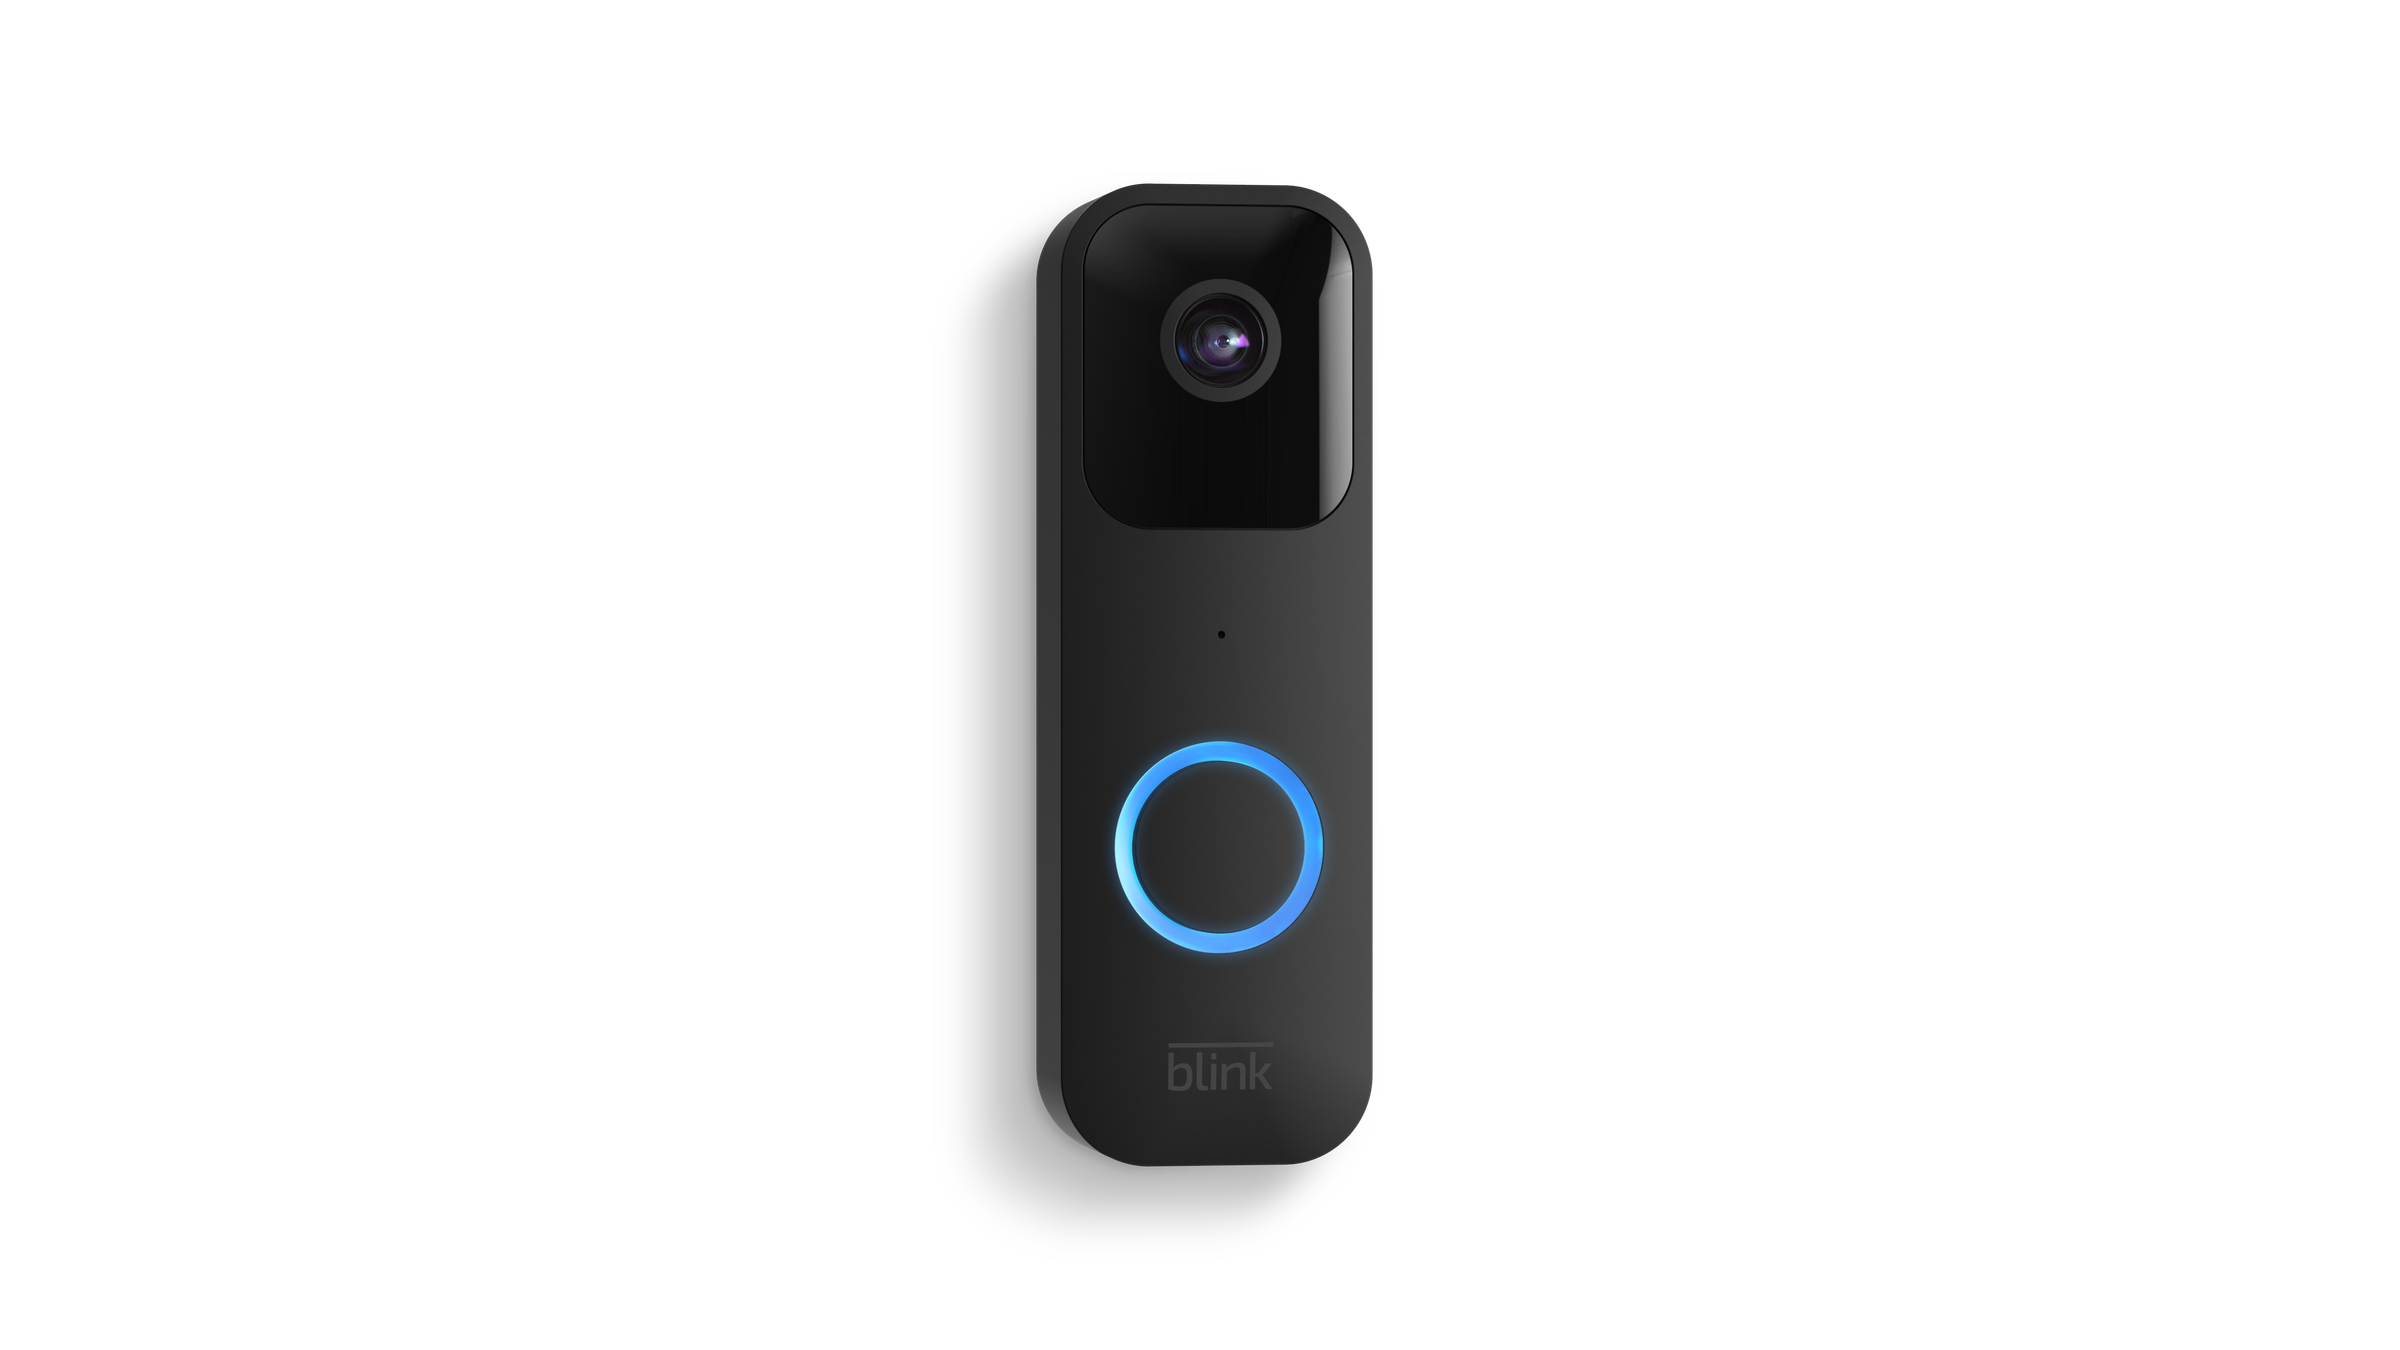 Blink’s new video doorbell runs on batteries, or can be fully wired, and is $10 cheaper than any of Ring’s offerings. 